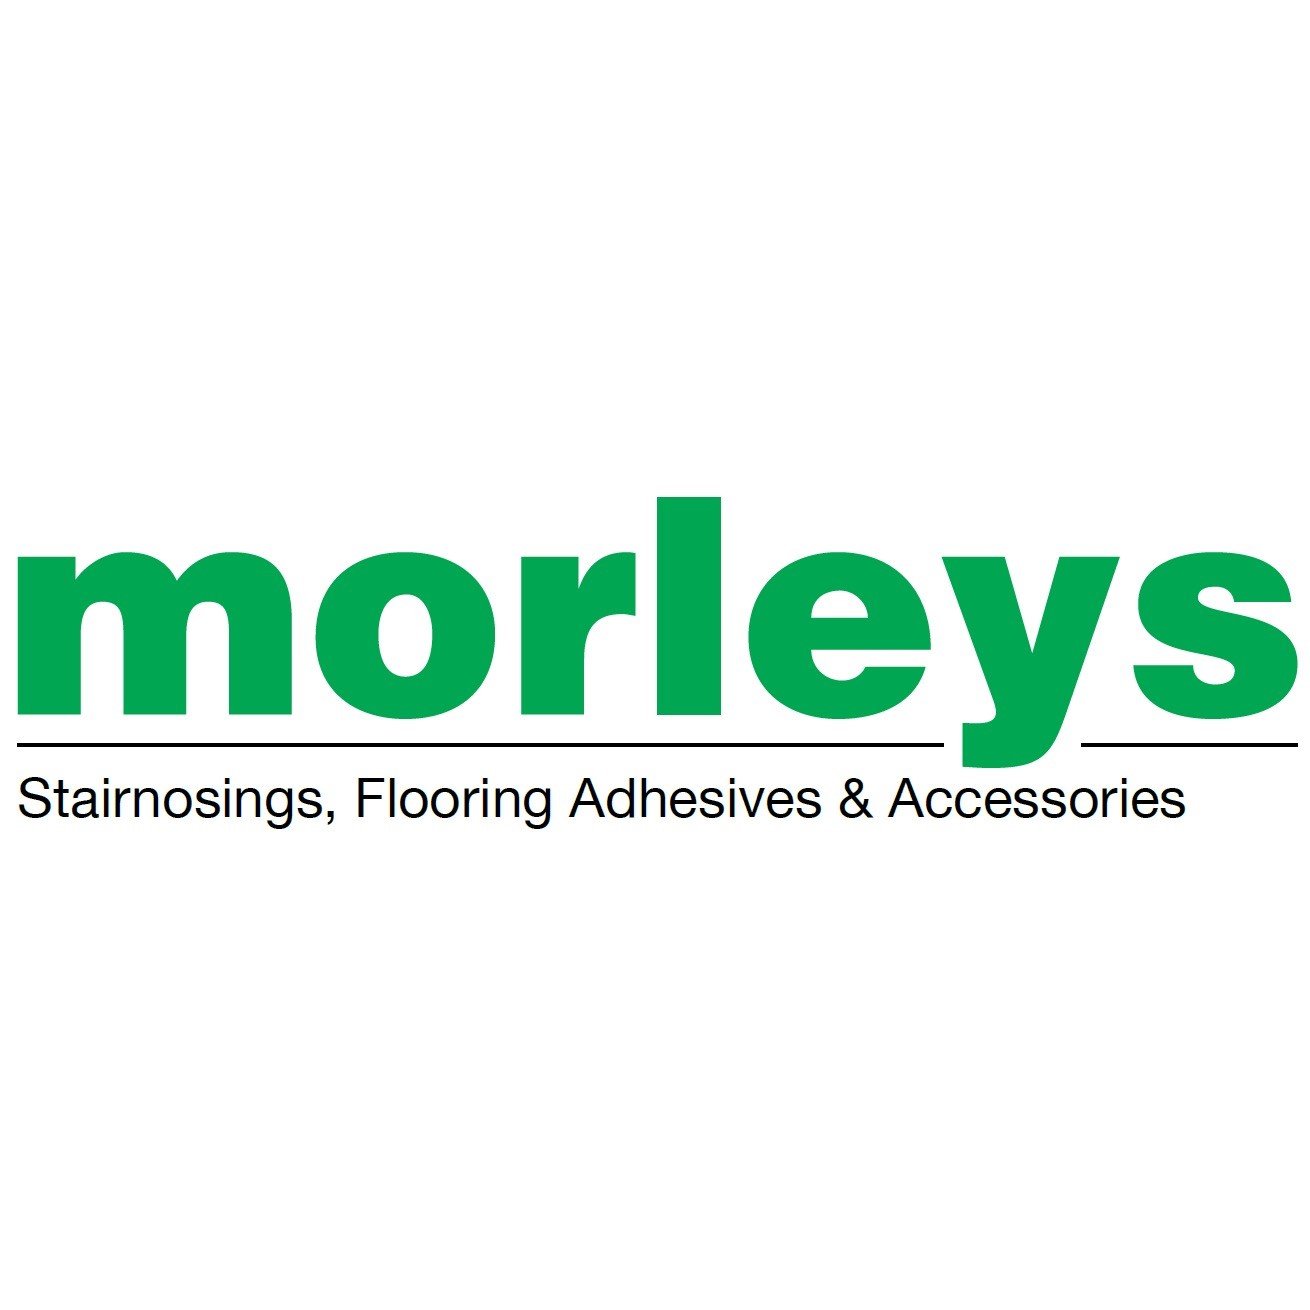 Morleys are a UK flooring manufacturer producing a range of stairnosings, flooring adhesives and accessories. Tel: 01772626700 Email: sales@morley2013.co.uk